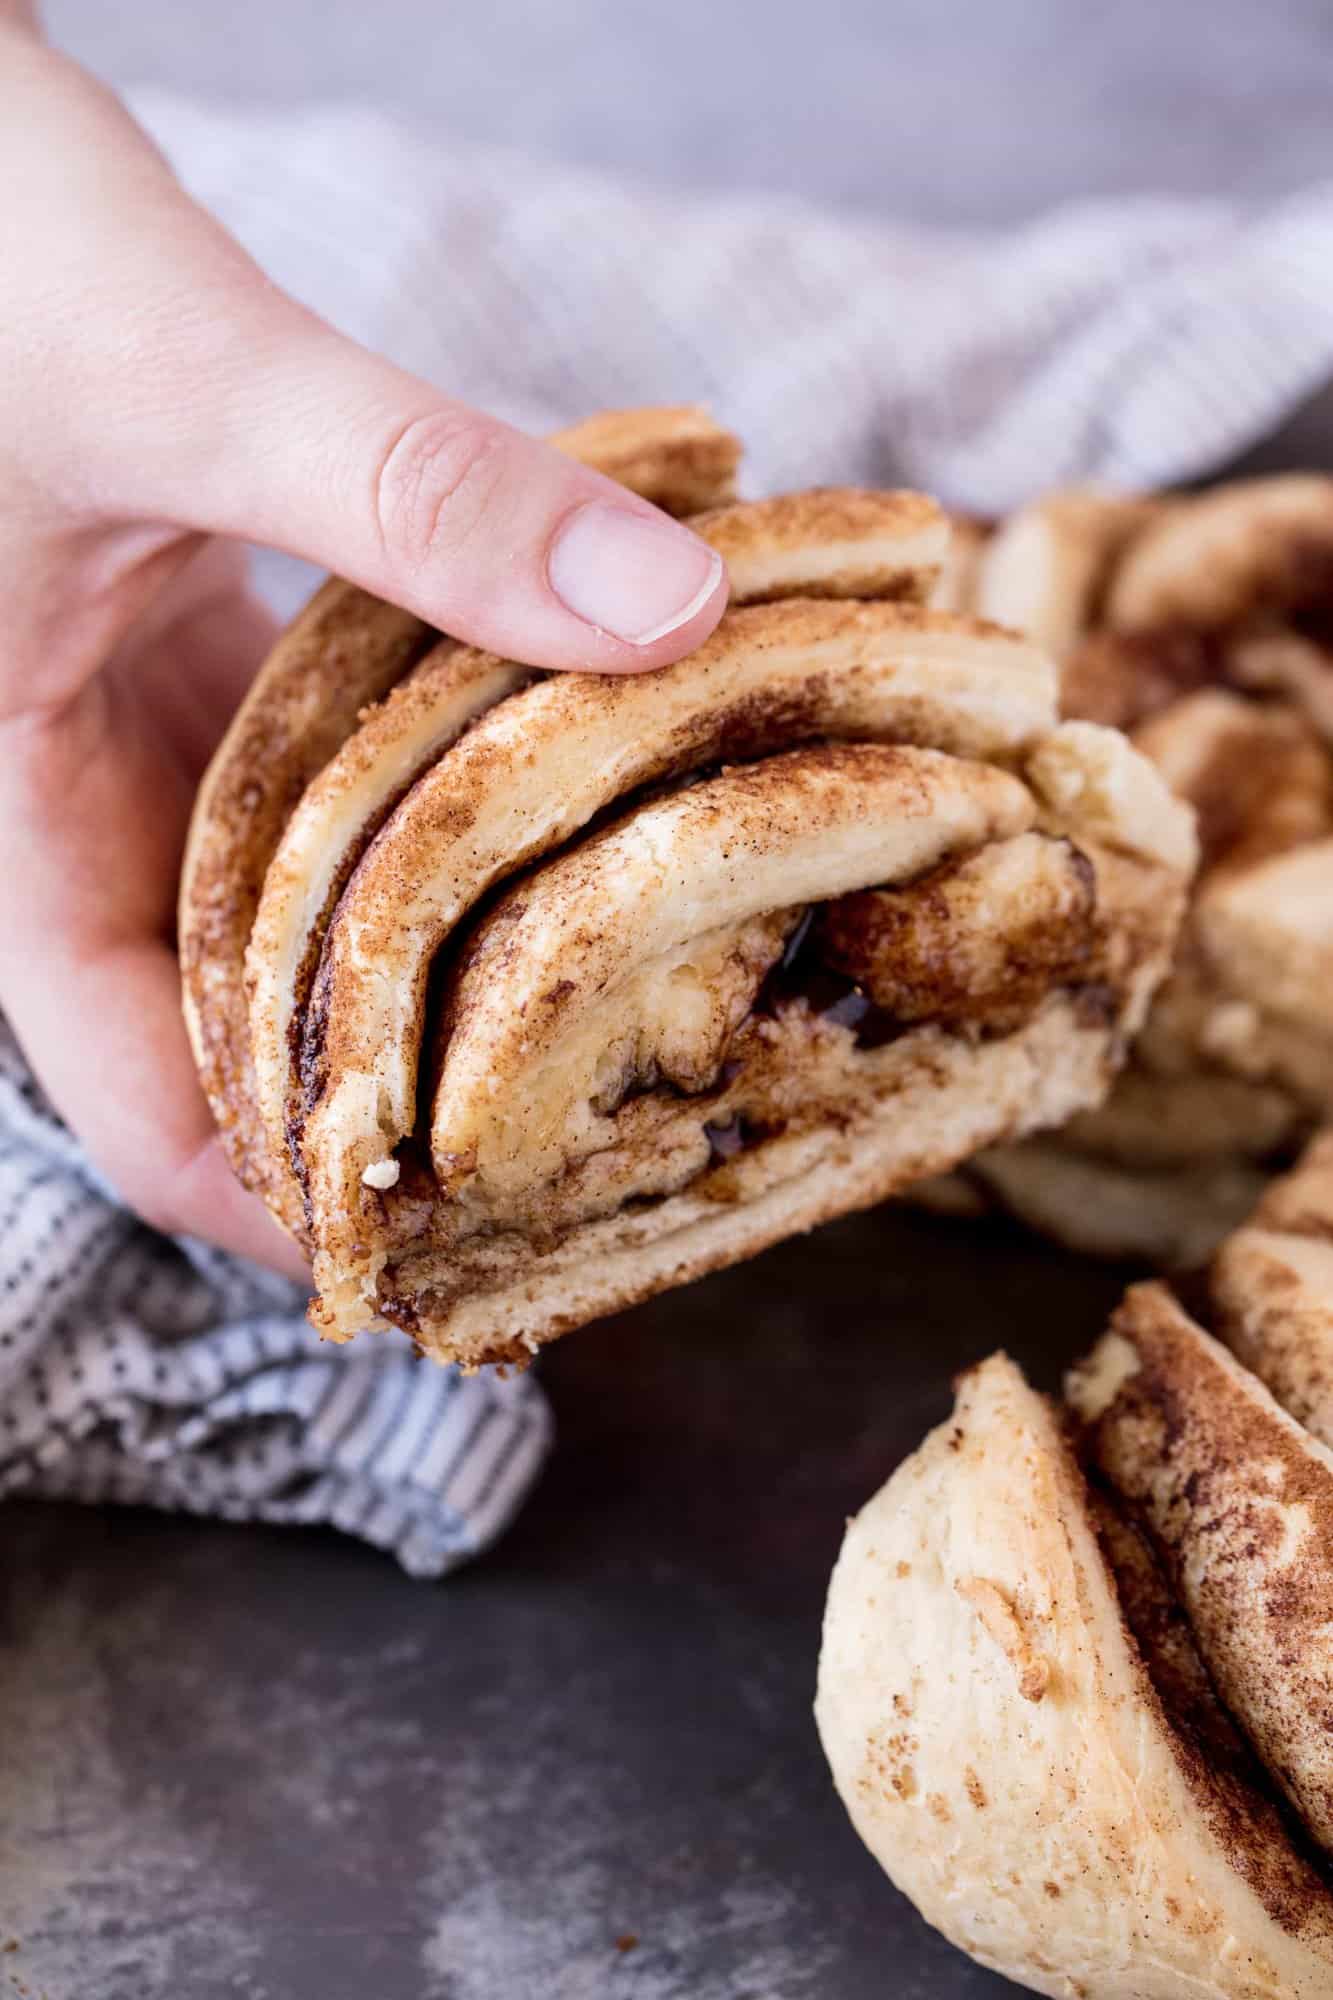 Cinnamon Roll Twist Bread gives you an impressive way to present the classic cinnamon roll flavors. And it's a lot easier than it looks!